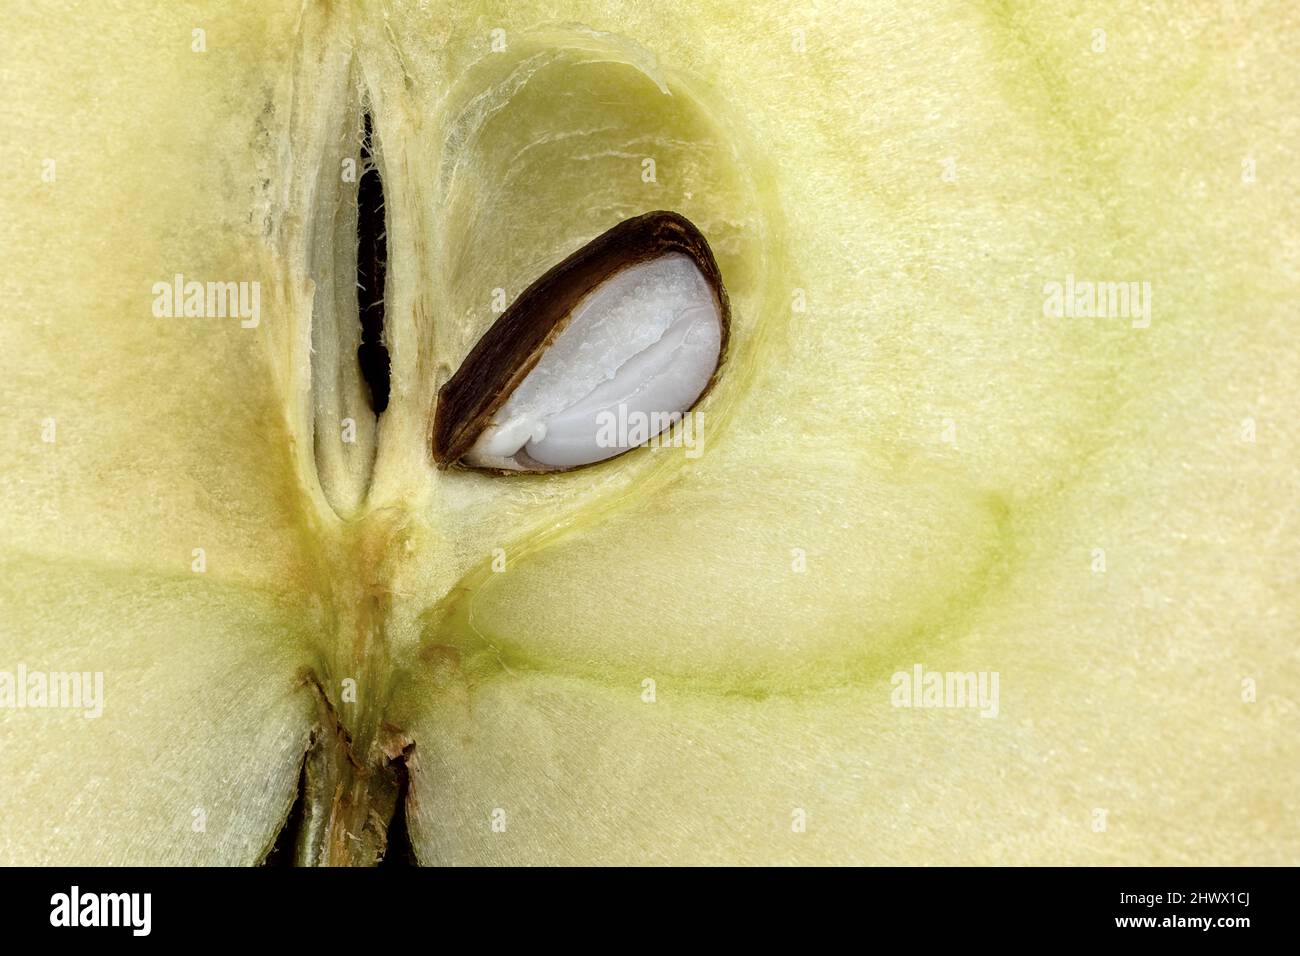 extreme close up of a halved apple with a sliced apple core Stock Photo